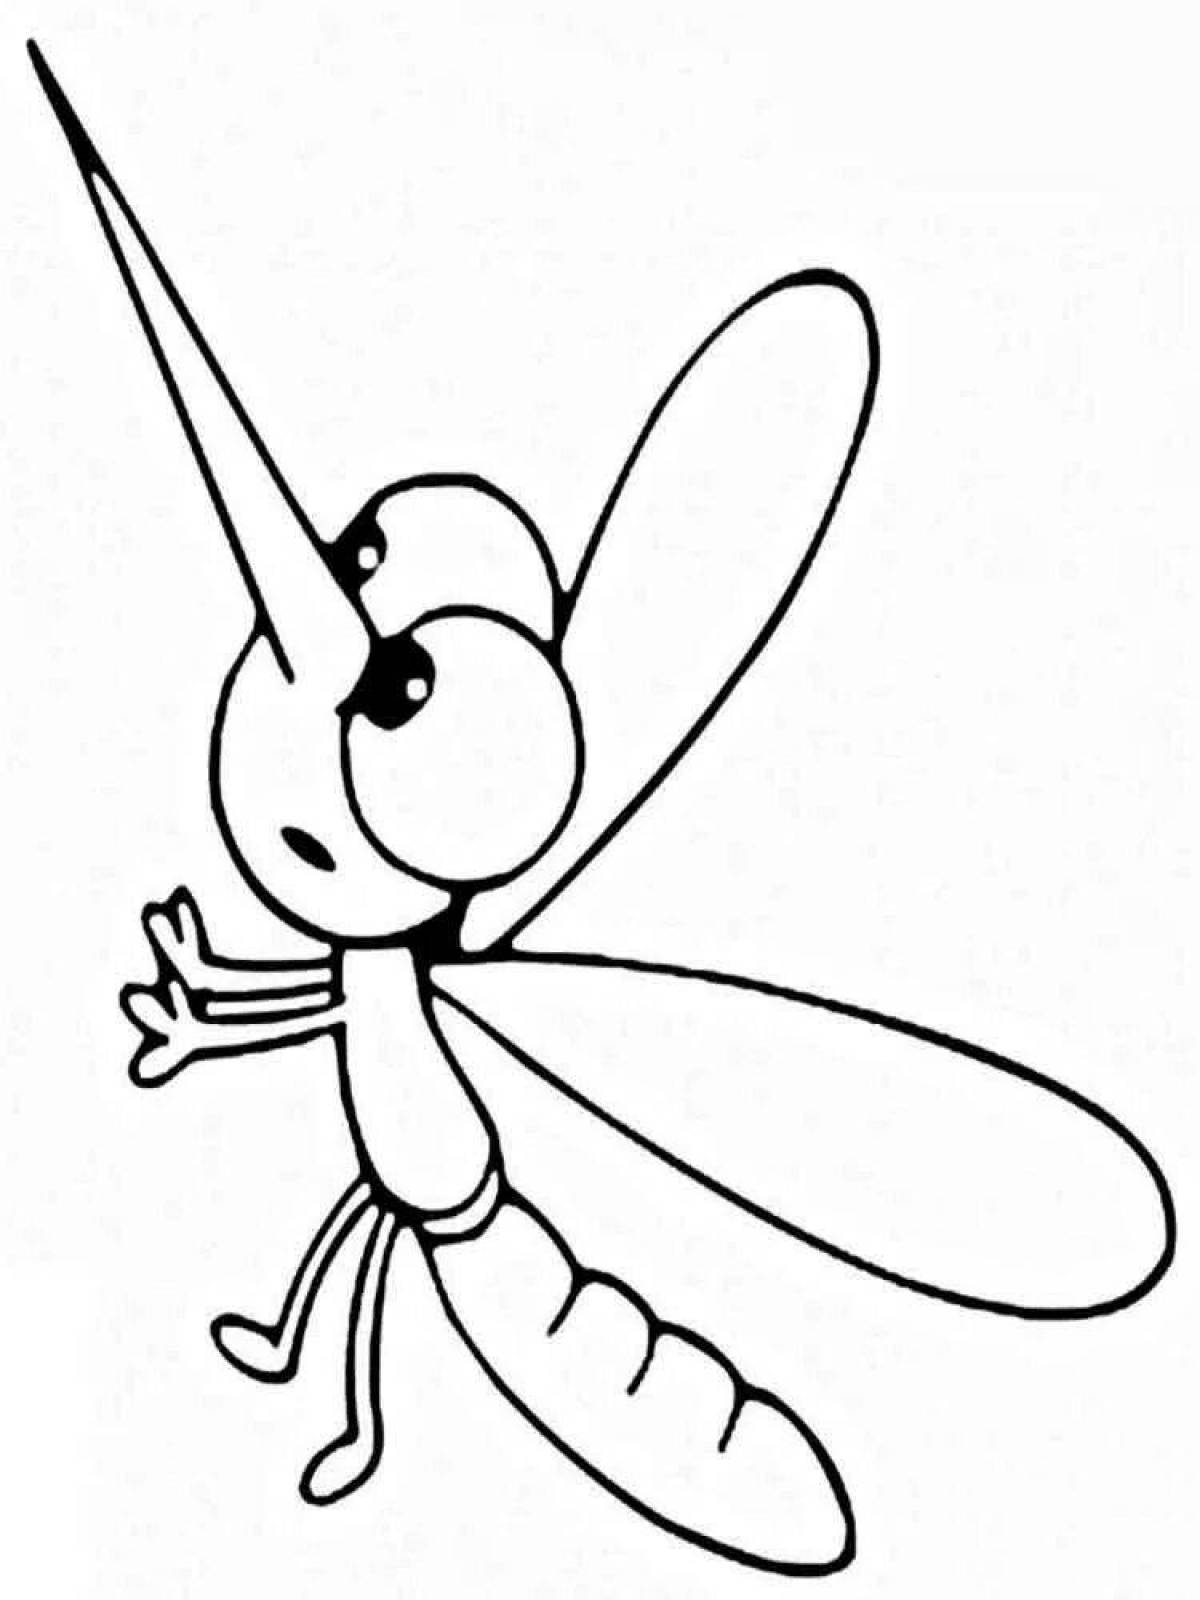 Mosquito for kids #9